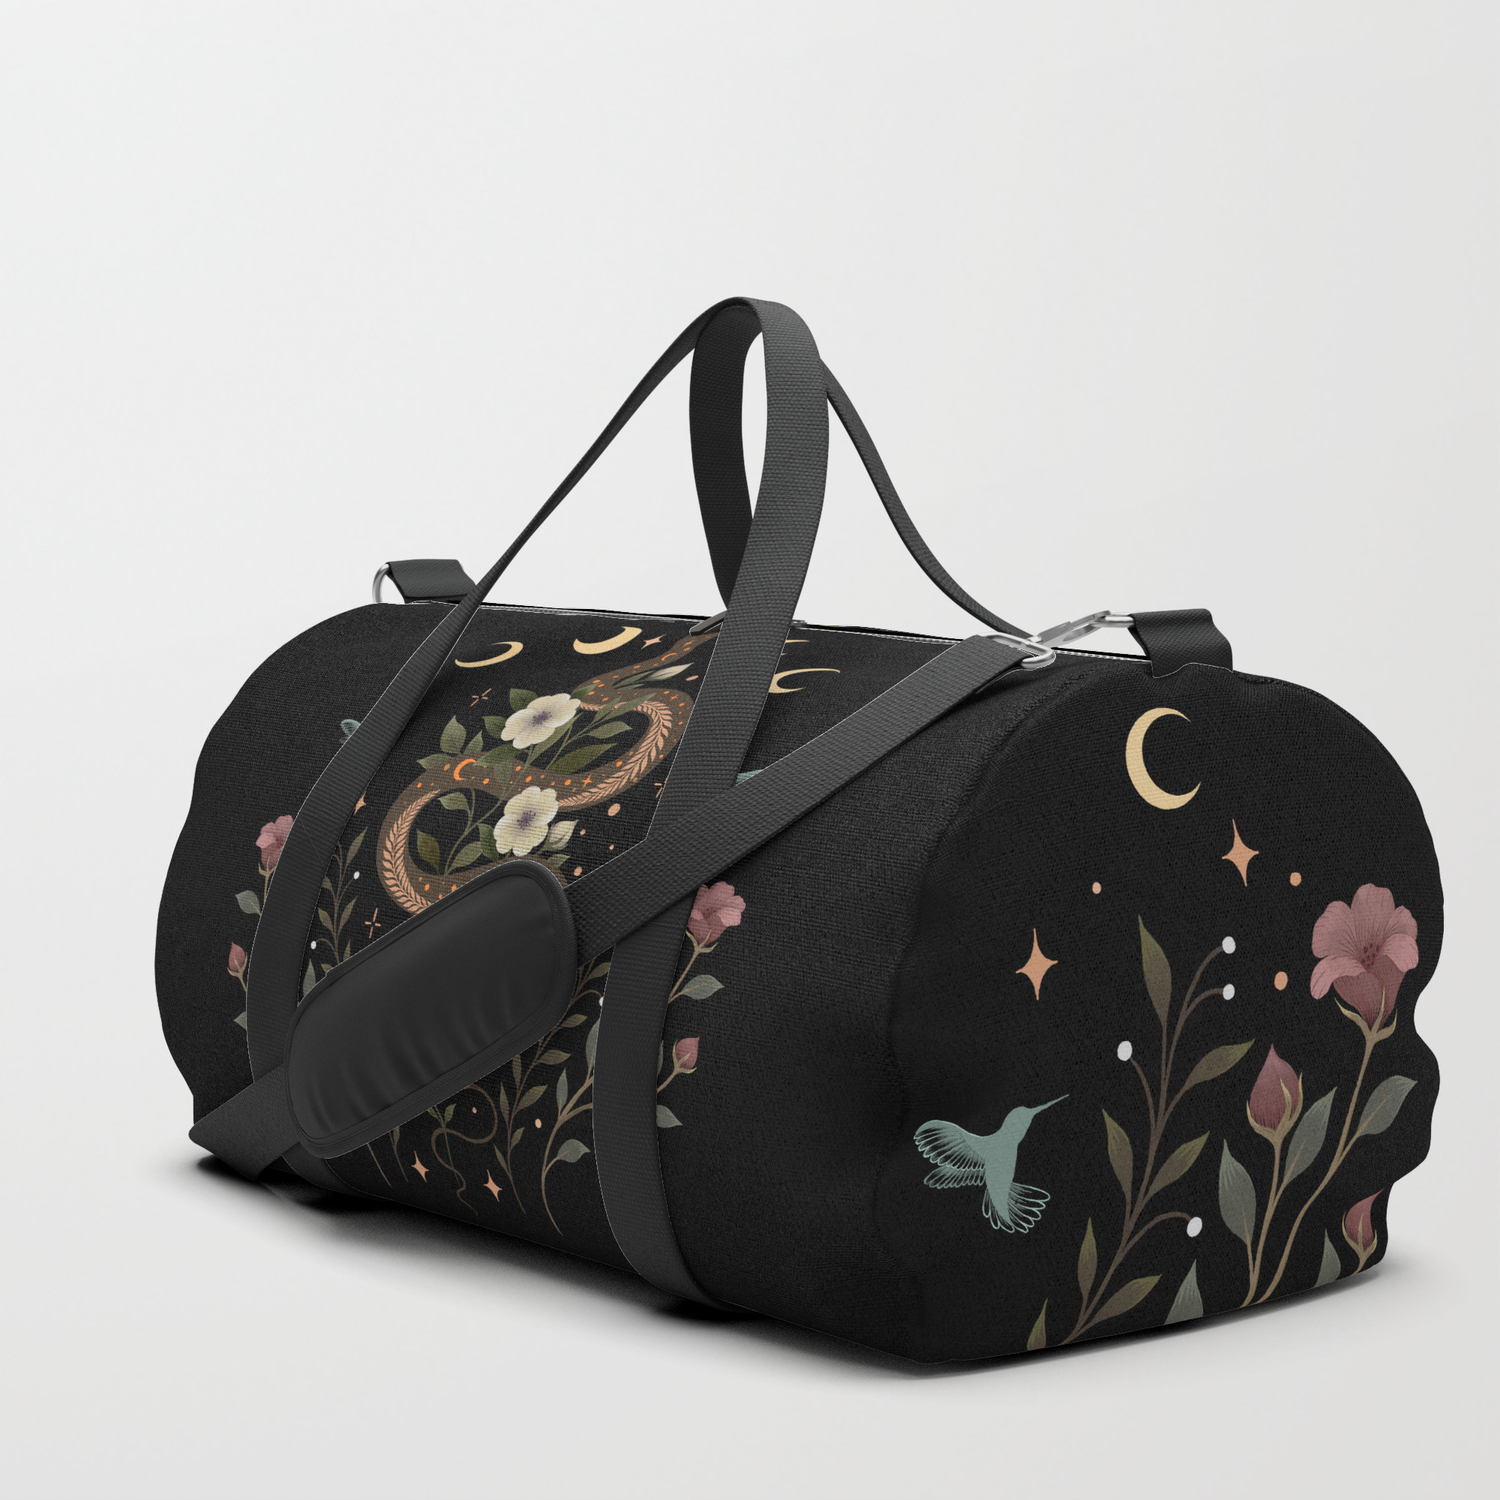 Portable Luggage Duffel Bag Kawaii Sting Ray Travel Bags Carry-on In Trolley Handle